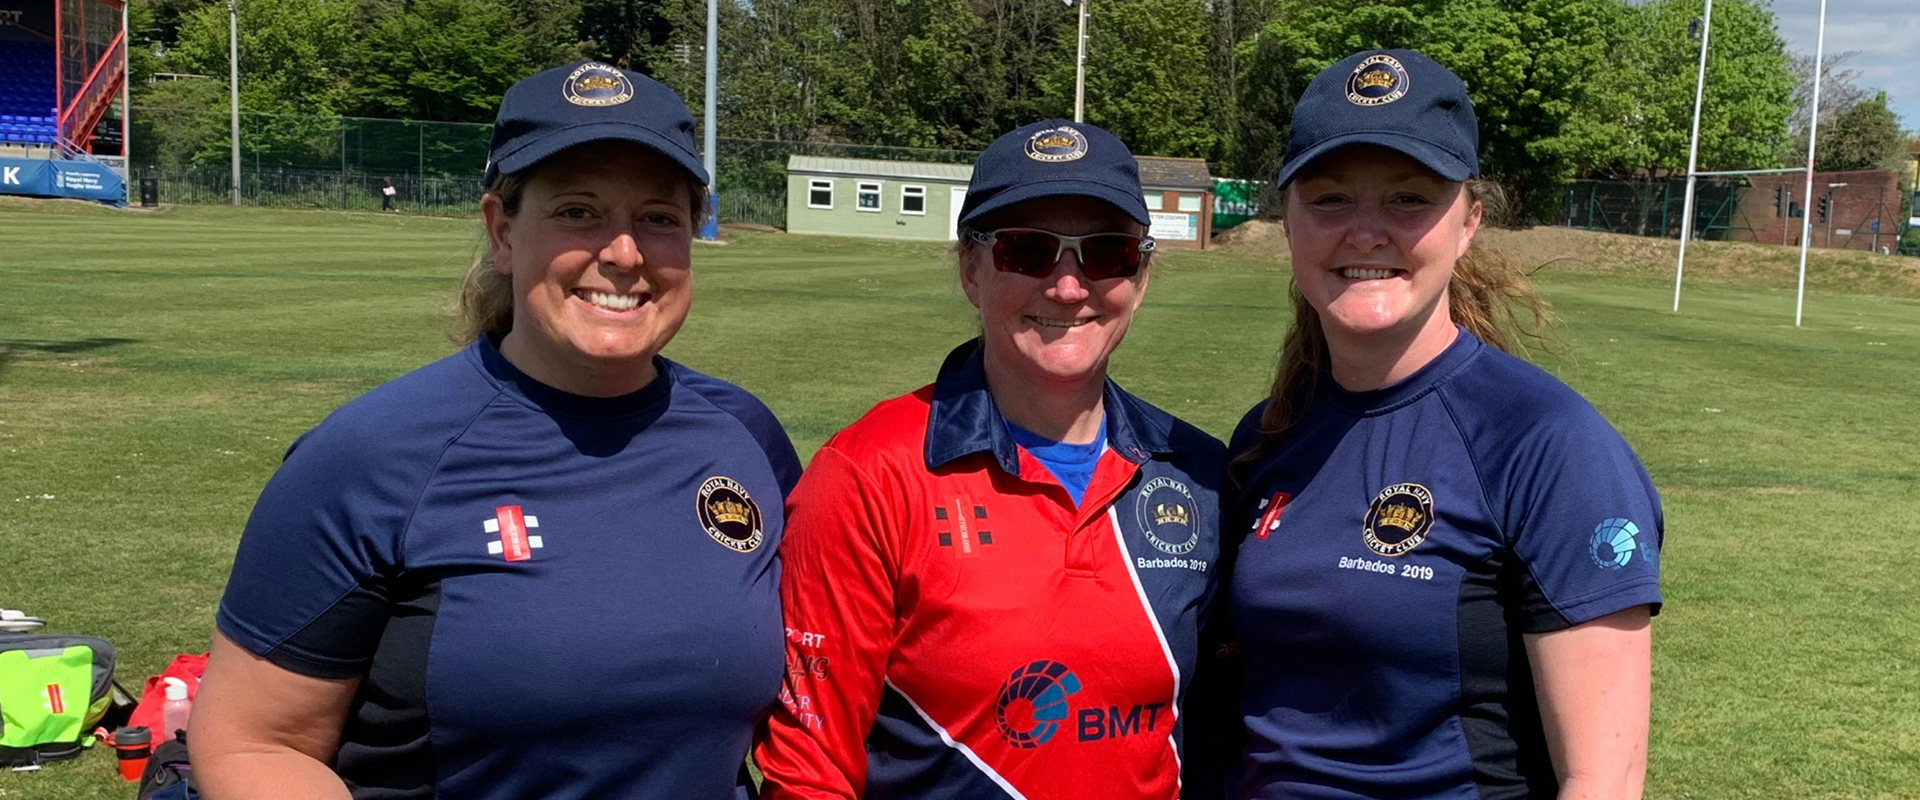 Members of the Royal Navy Women's Cricket Team